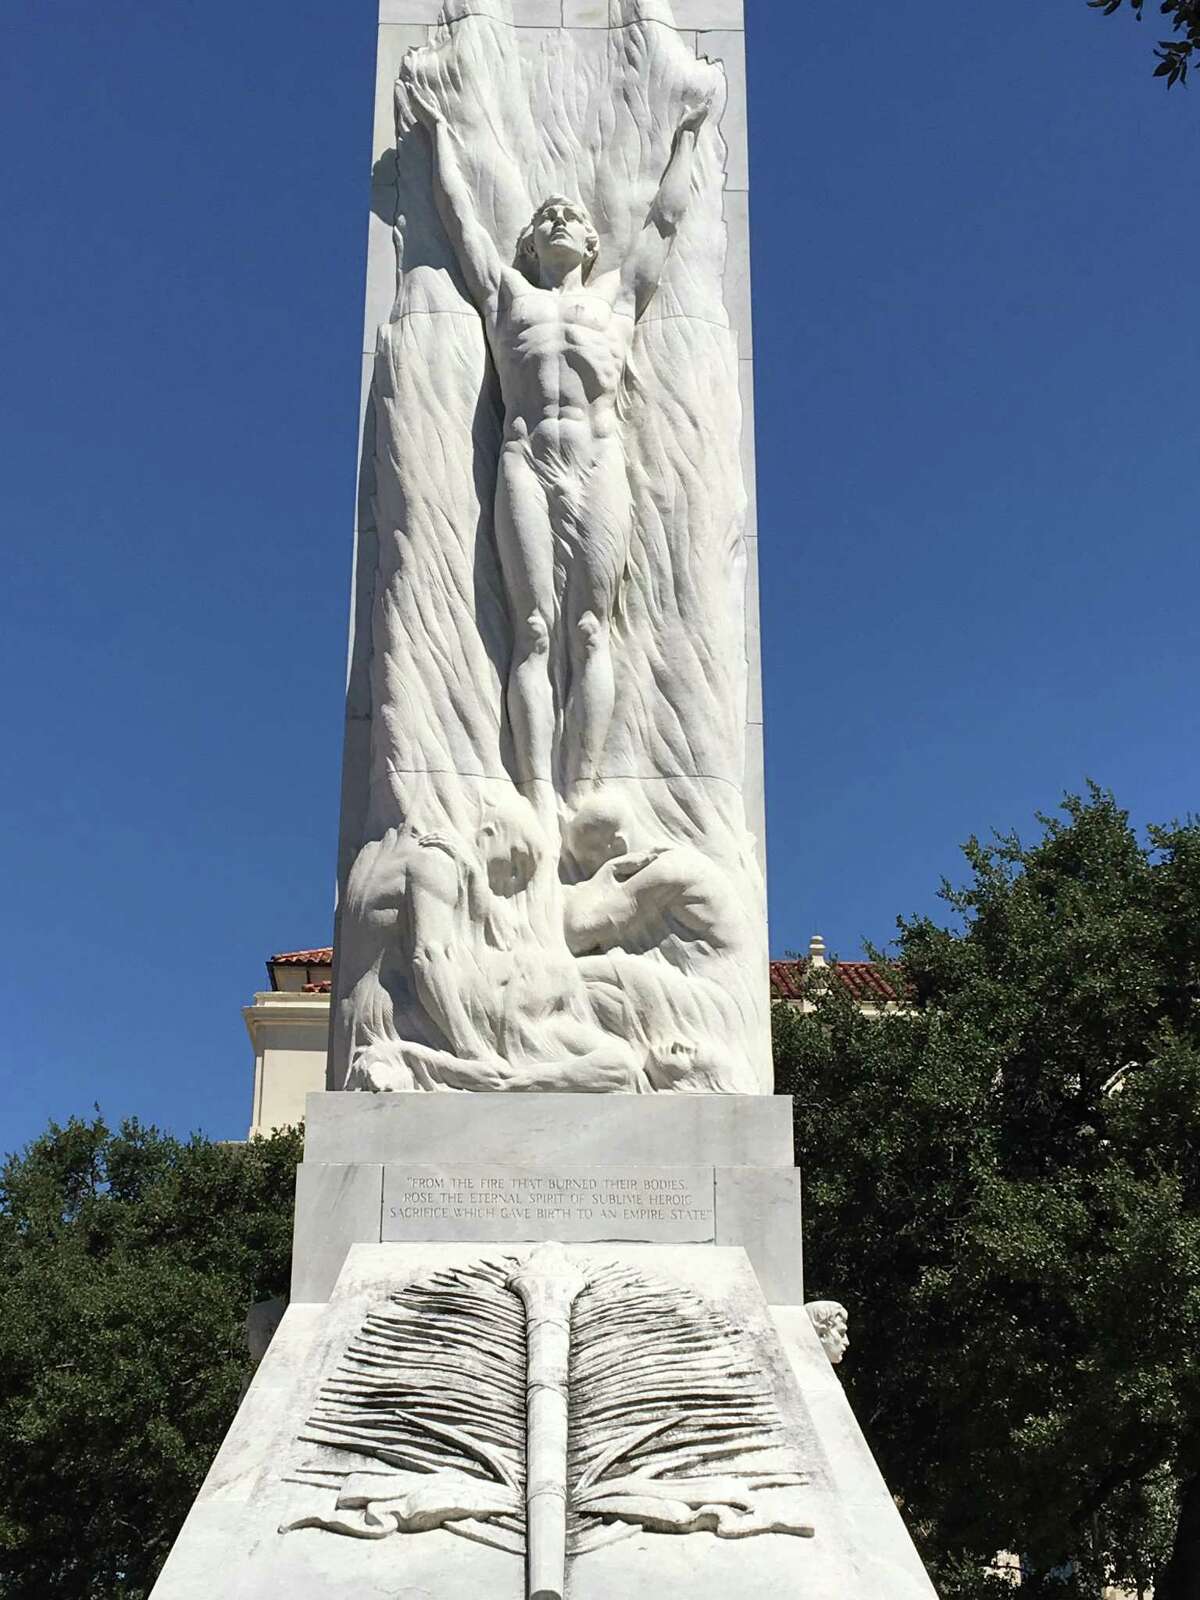 The 1930s Alamo Cenotaph, a work by artist Pompeo Coppini titled "The Spirit of Sacrifice," includes sculpted images of flames and text referencing “fire that burned their bodies.” But a 1999 report by UTSA archaeologists said the Cenotaph's location is likely "the only place that can safely be eliminated from contention" as a site of a funeral pyre after the 1836 battle.